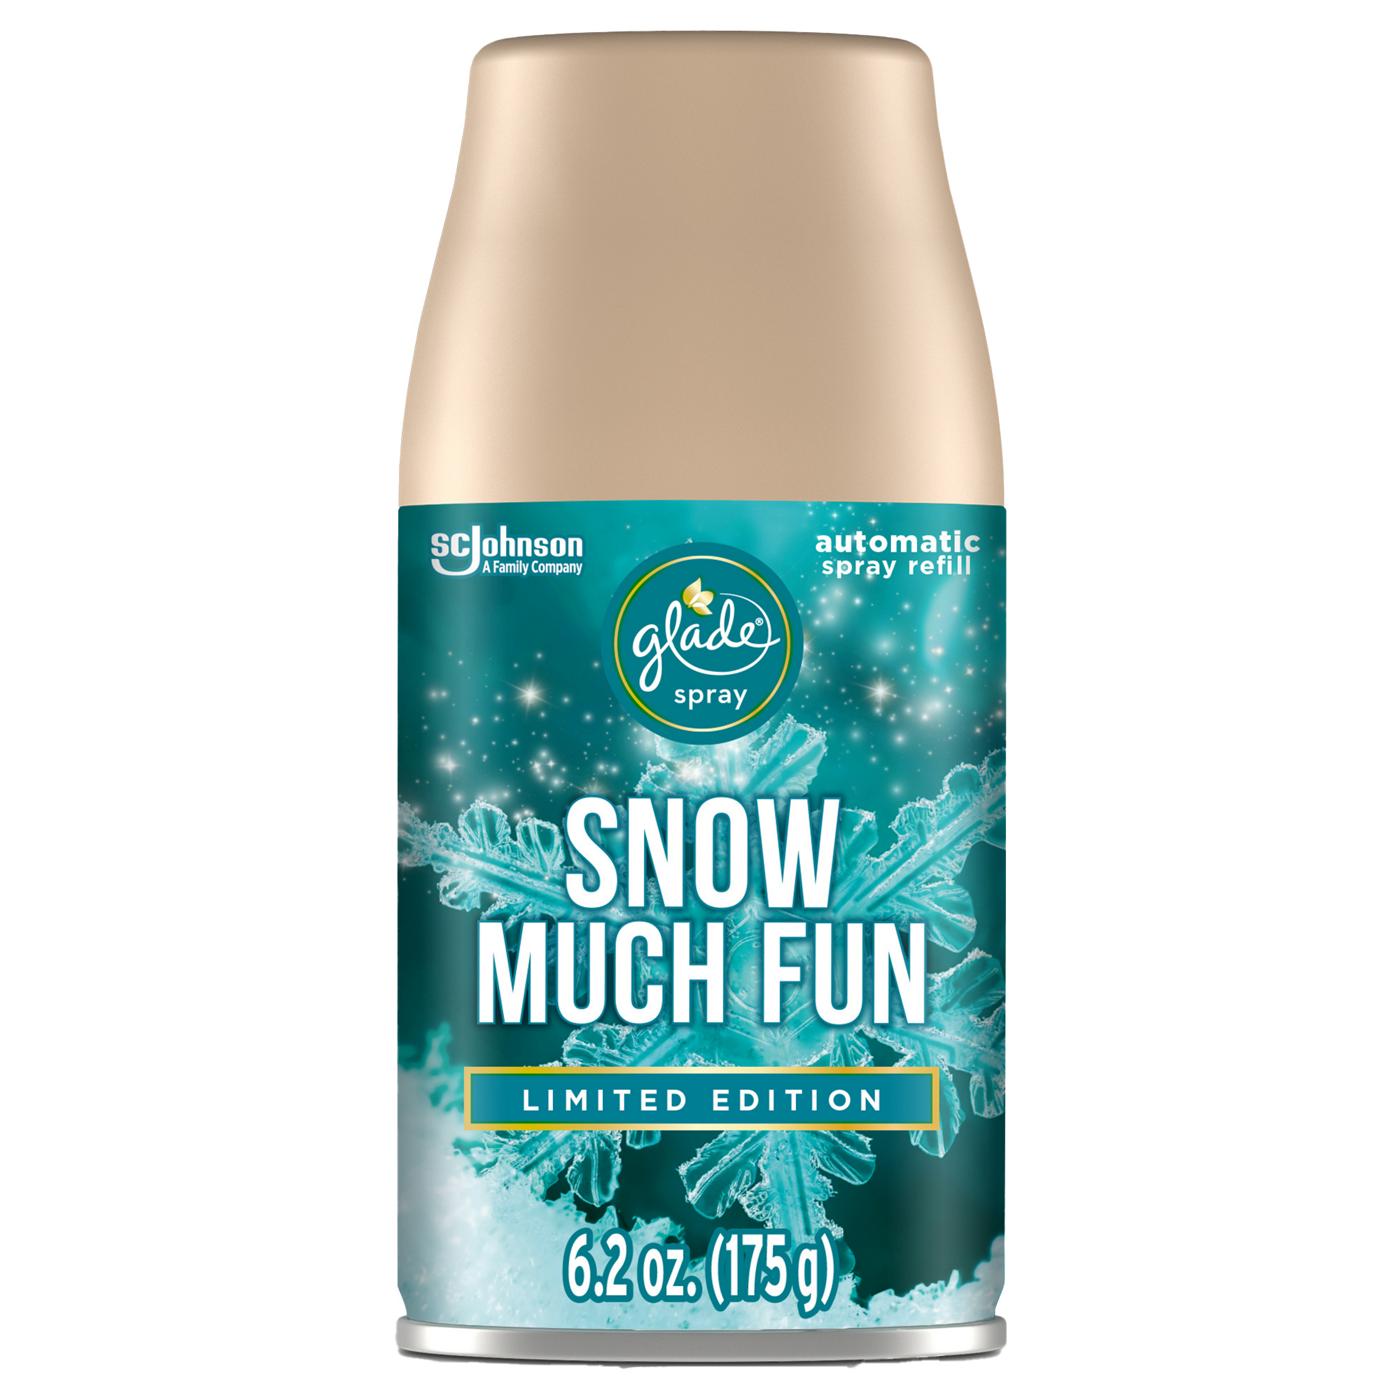 Glade Automatic Spray Refill - Snow Much Fun; image 1 of 2